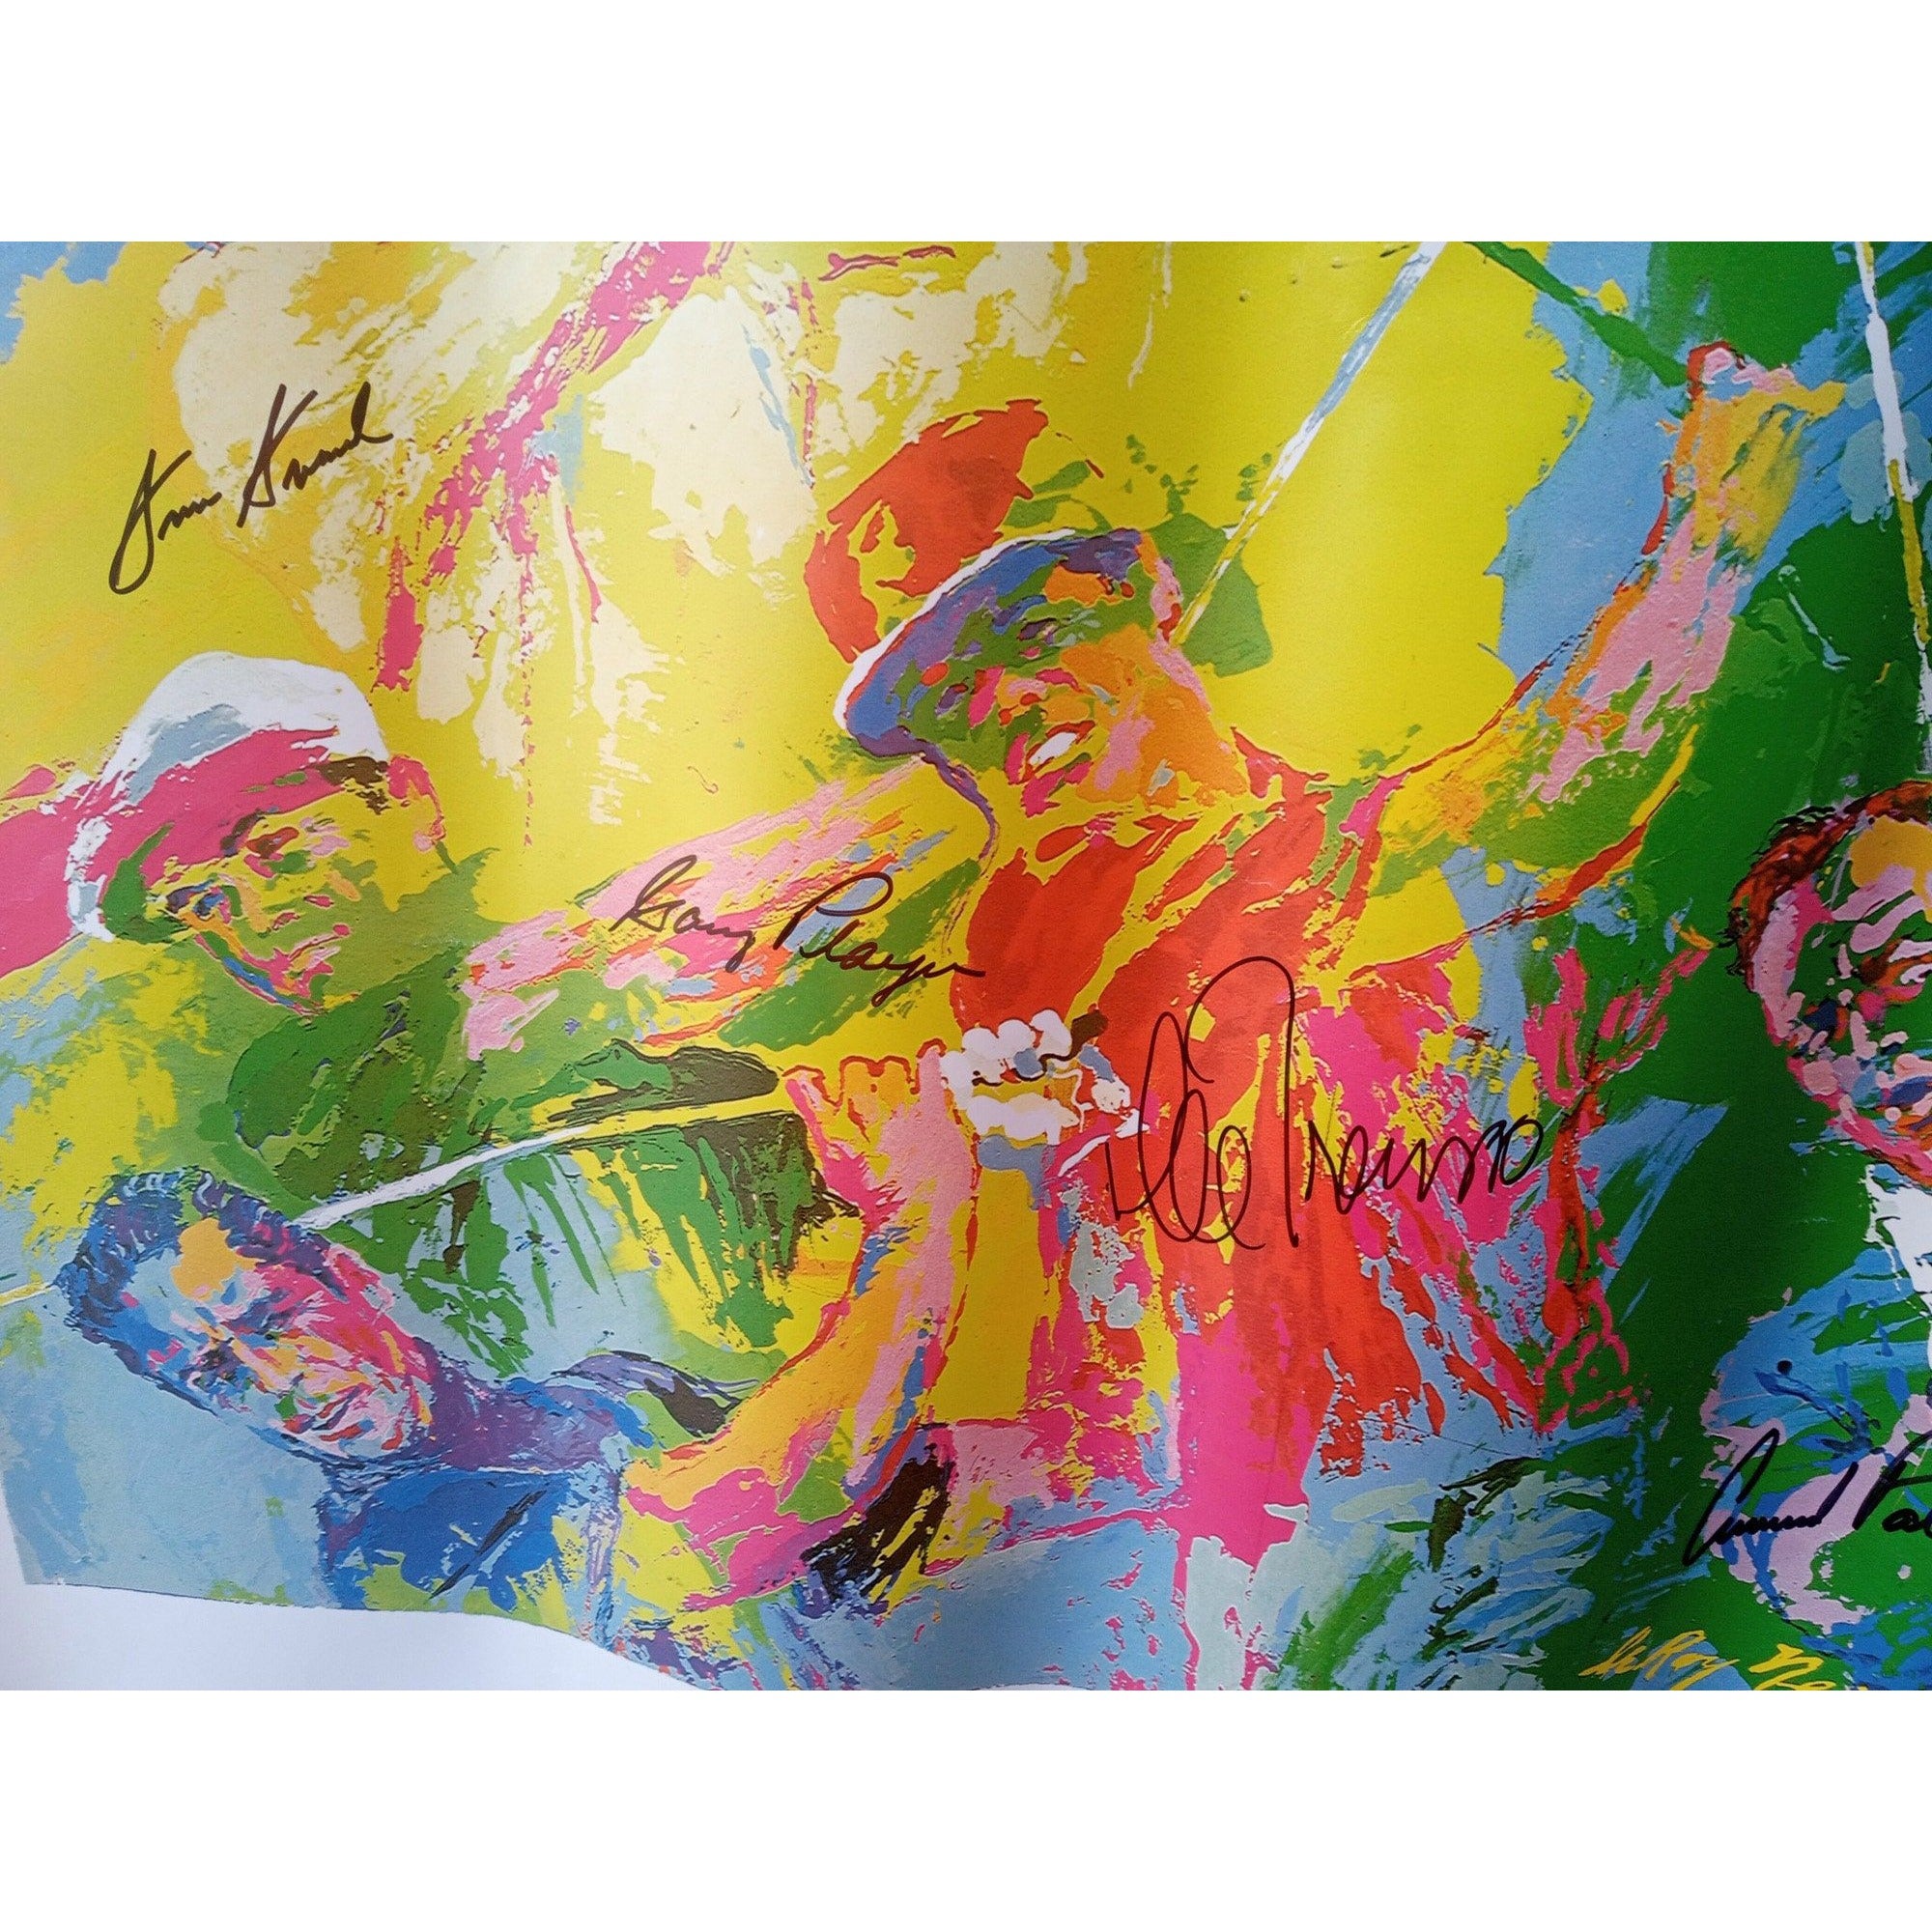 Jack Nicklaus, Arnold Palmer, Lee Trevino, Gary Player, Sam Snead, LeRoy Neiman signed print with proof